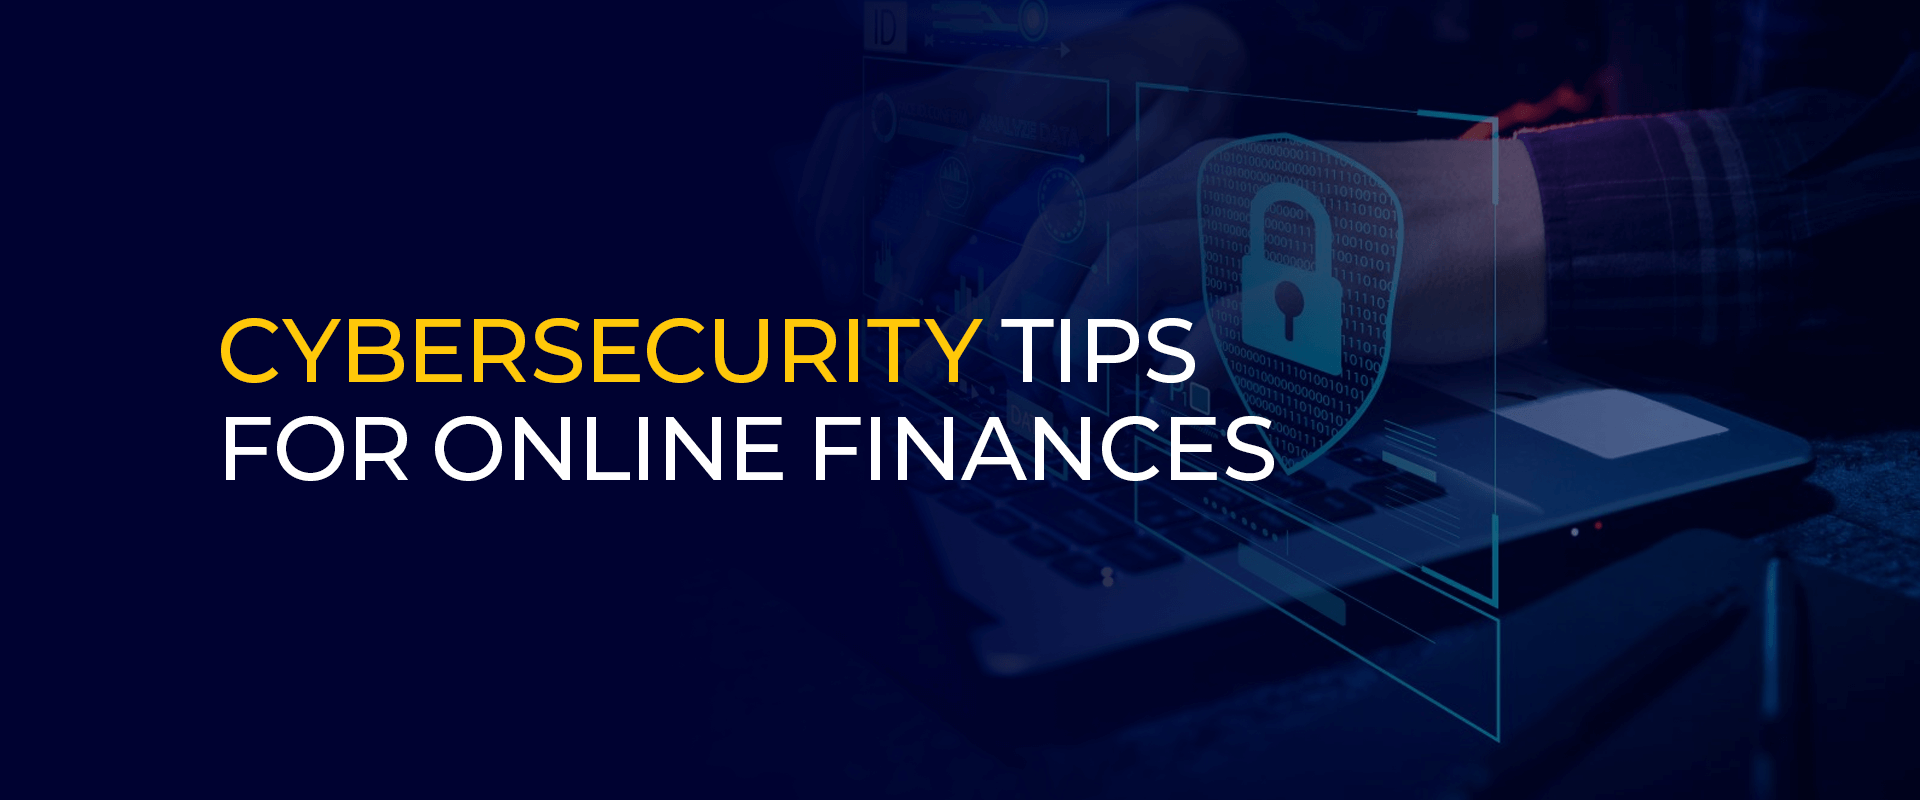 Cybersecurity Tips for Online Finances